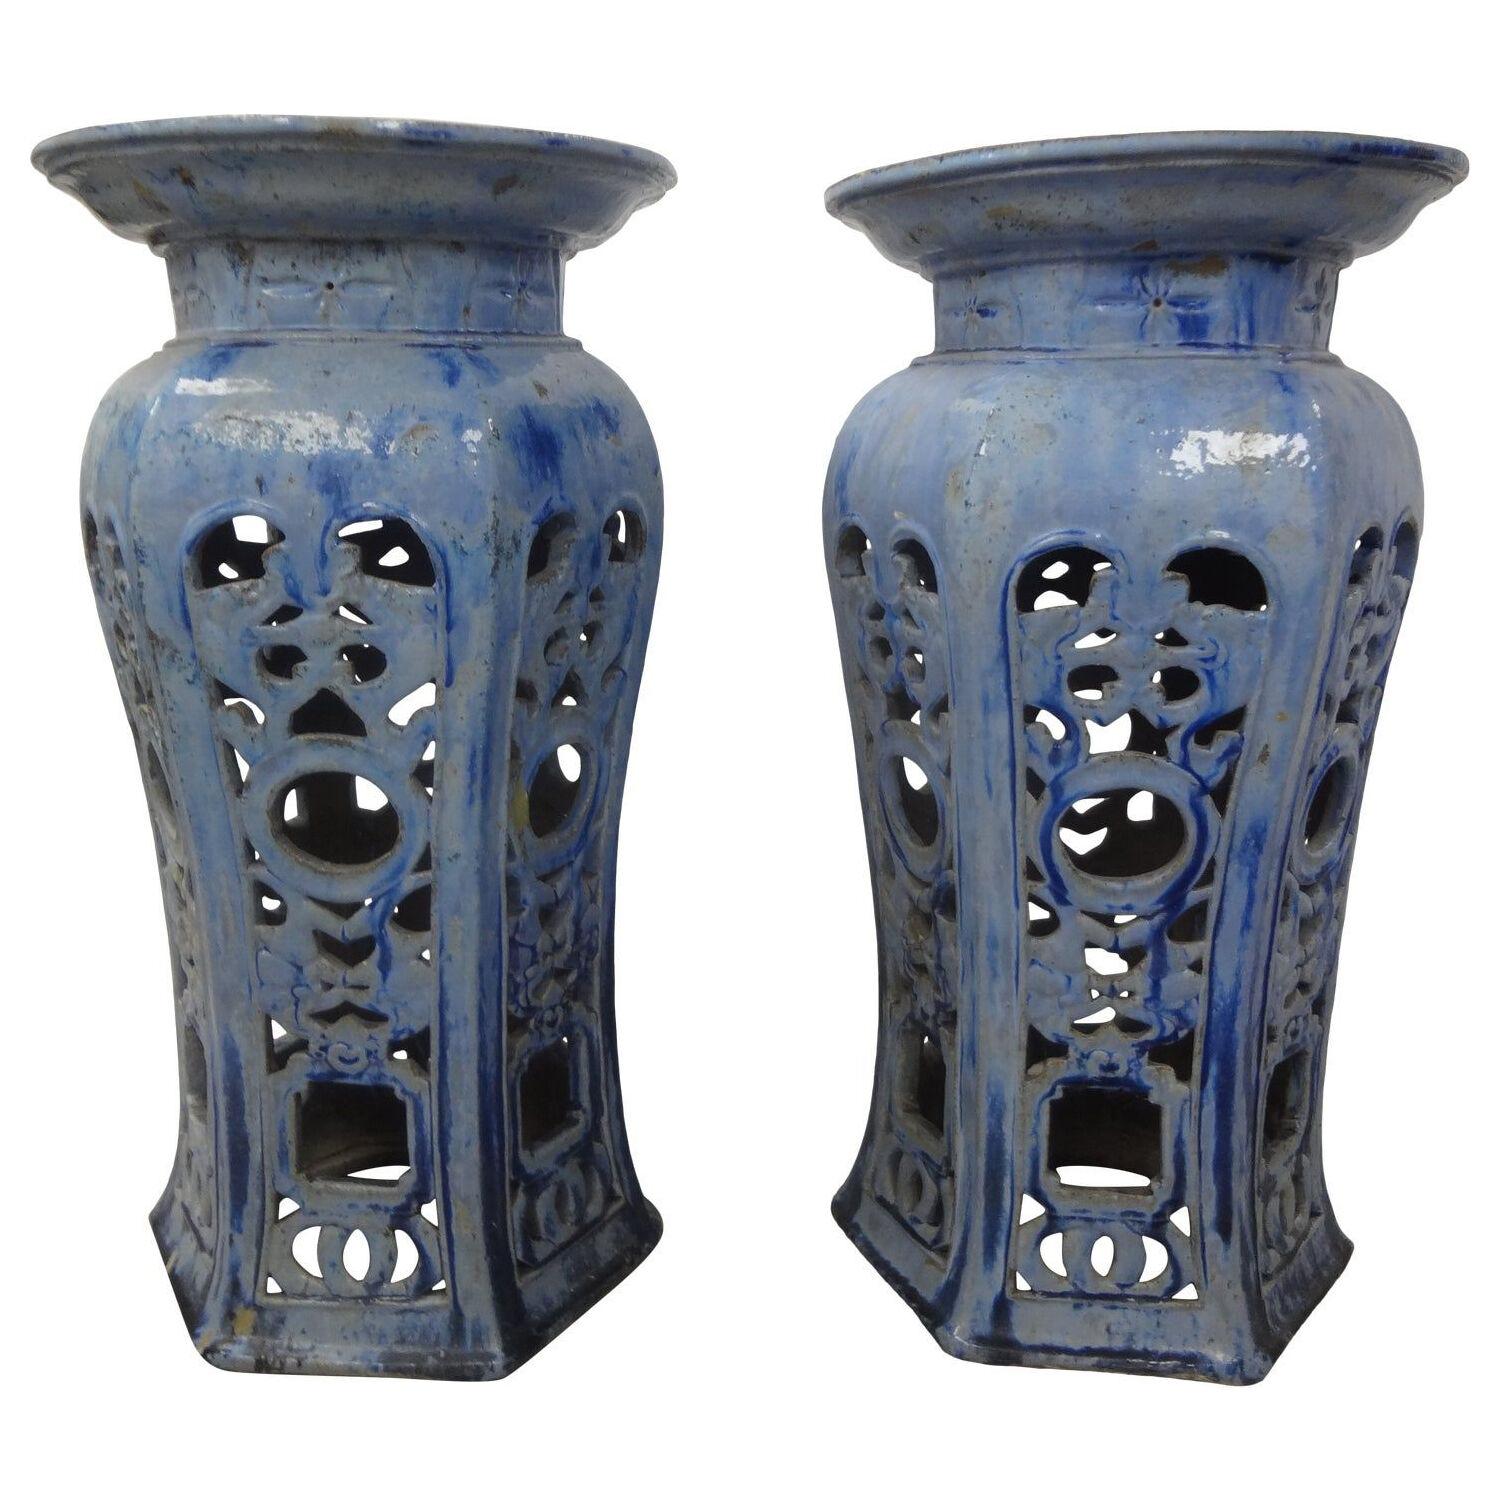 Pair Of Early 20th Century Chinese Glazed Terra Cotta Pedestals or Stands 